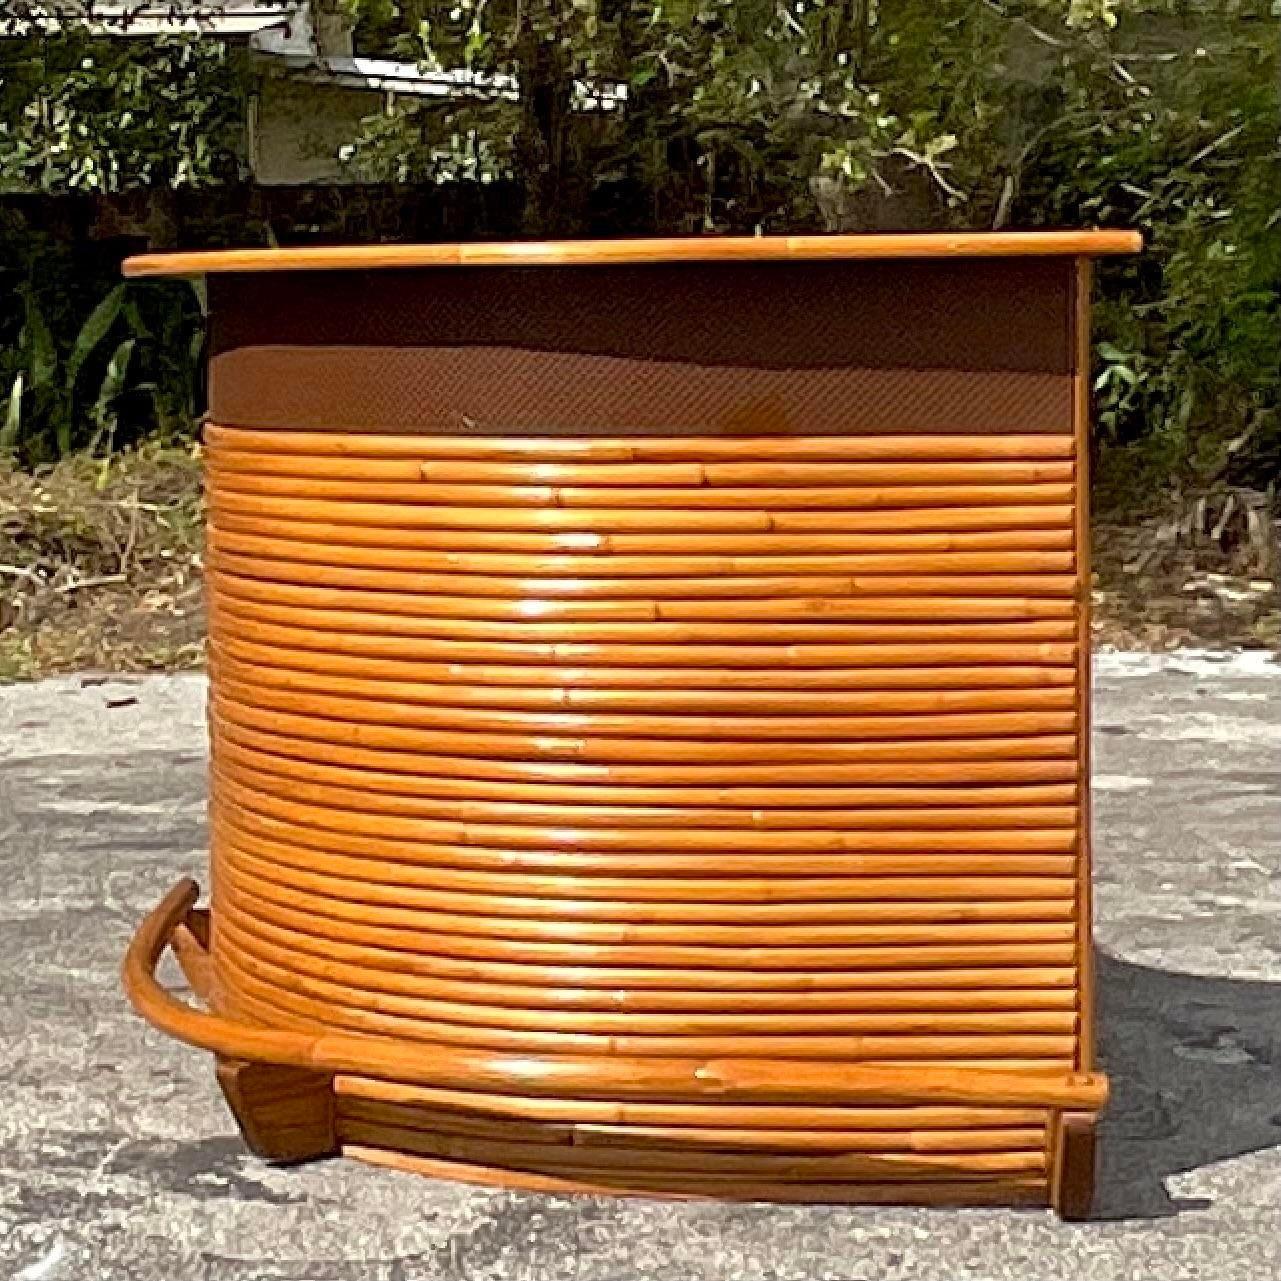 A fabulous vintage Coastal dry bar. A chic bent rattan in a boomerang shape. Gorgeous retro laminate top in great shape. Running rail along the bottom. Lots of great storage behind. Acquired from a Palm Beach estate.